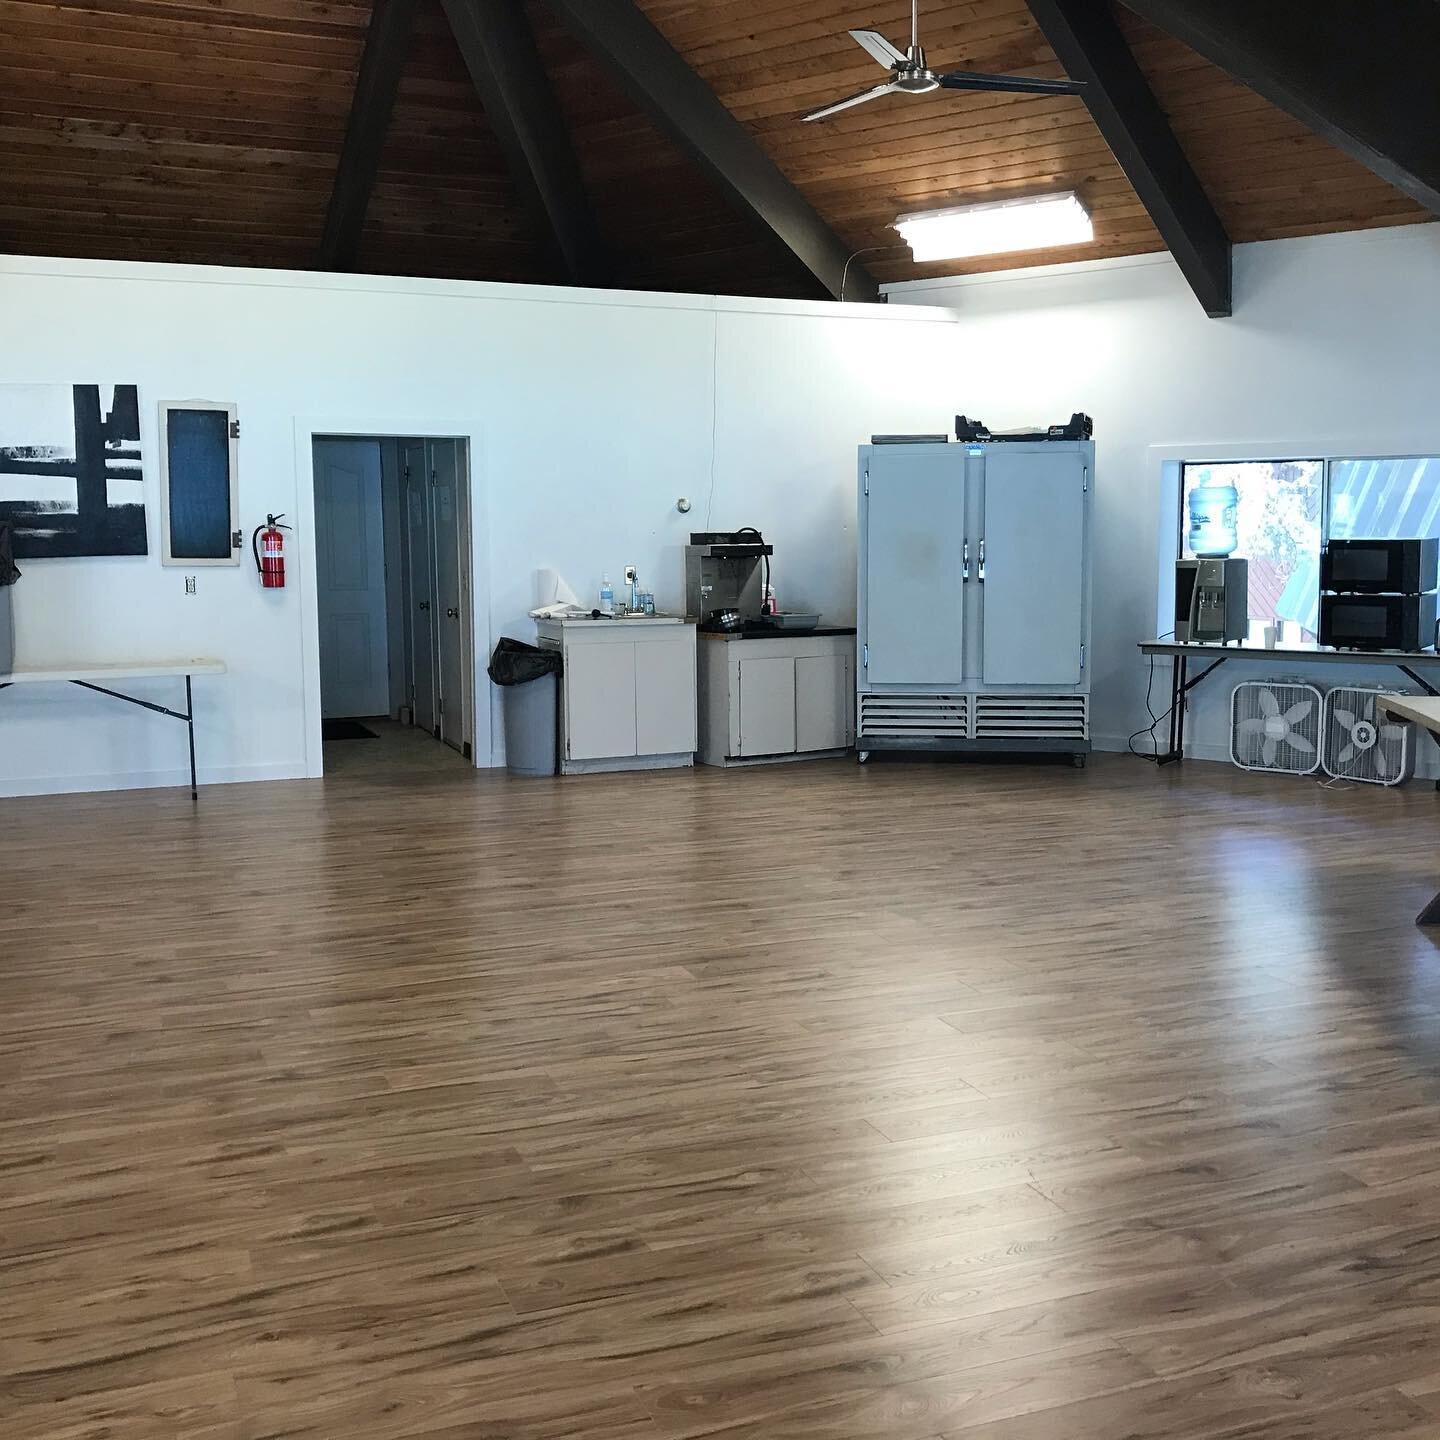 The dining hall just got better! New floors, a fresh coat of paint, new ceiling fans and a few more operable windows! Can&rsquo;t wait for groups to enjoy it this summer! #idahocamp #idahoretreat #idahoevents #idahoretreats #christiancamps #summercam